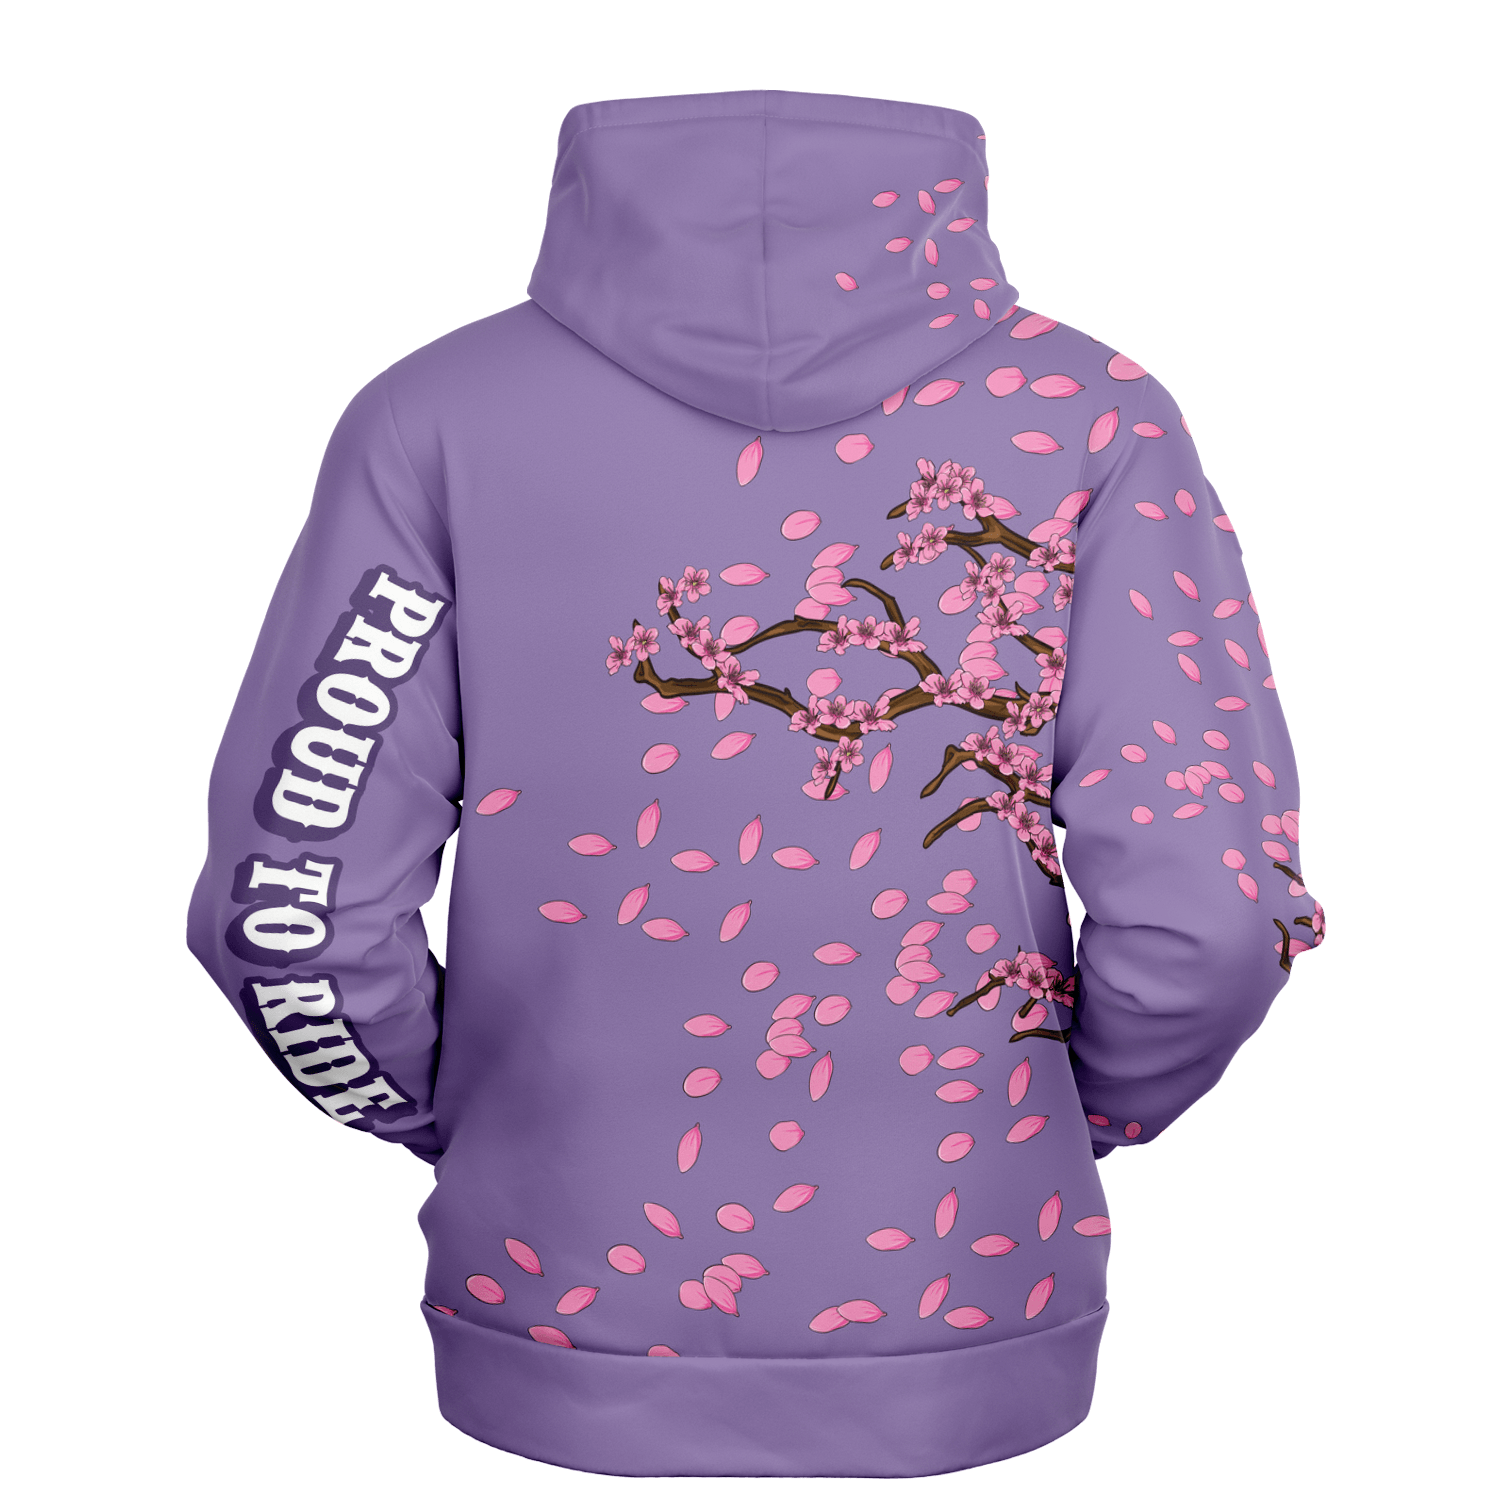 Back of the Purple Hoodie, where we can see the words: "PROUD TO RIDE" written on the left arm. A Cherry Blossom is fin pink flower on the right side of the granment